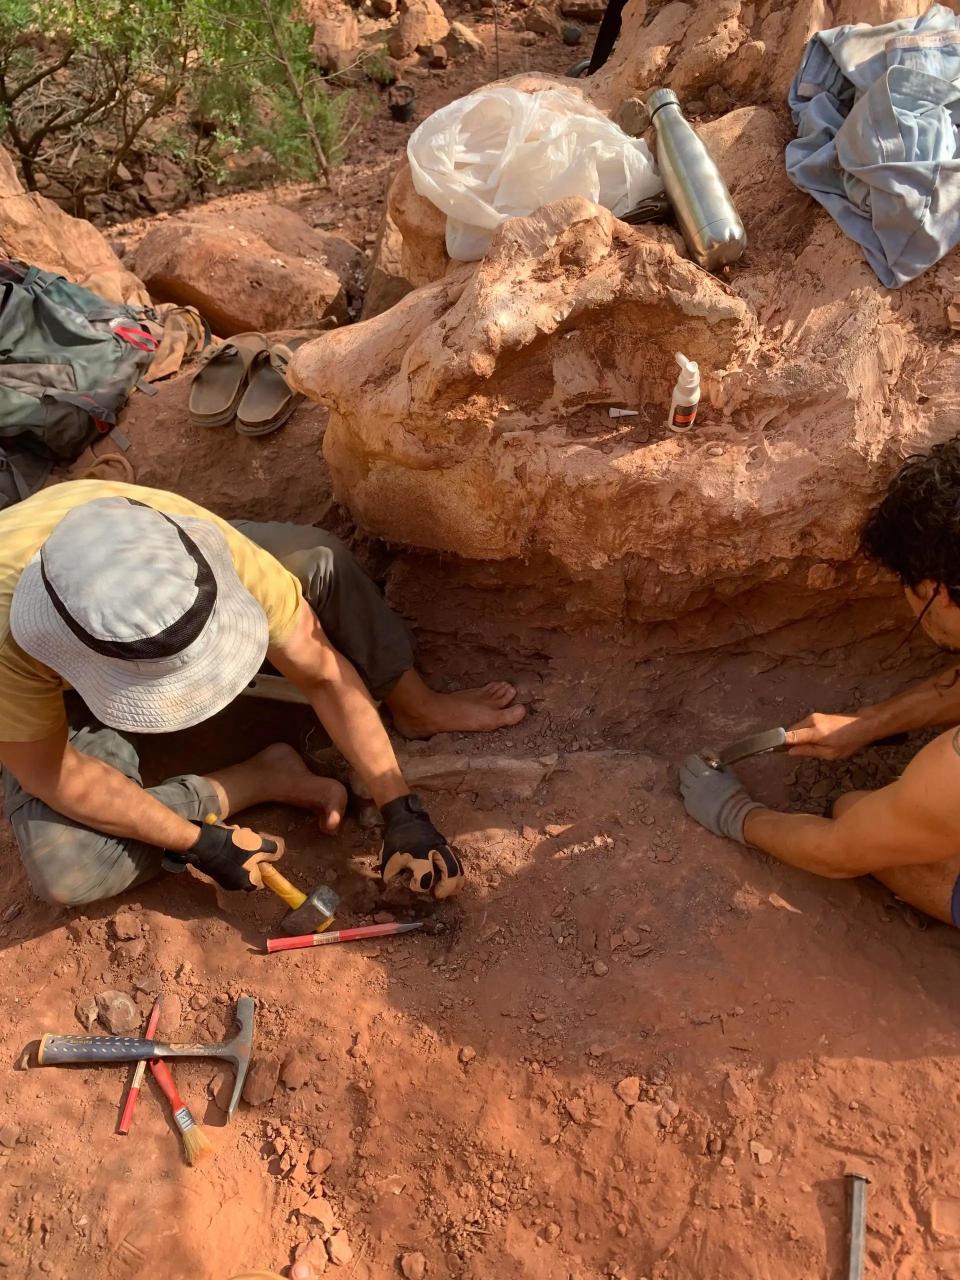 ACAP worked to excavate the bones for two years, keeping the discovery quiet to keep it safe. / Credit: Damien Boschetto